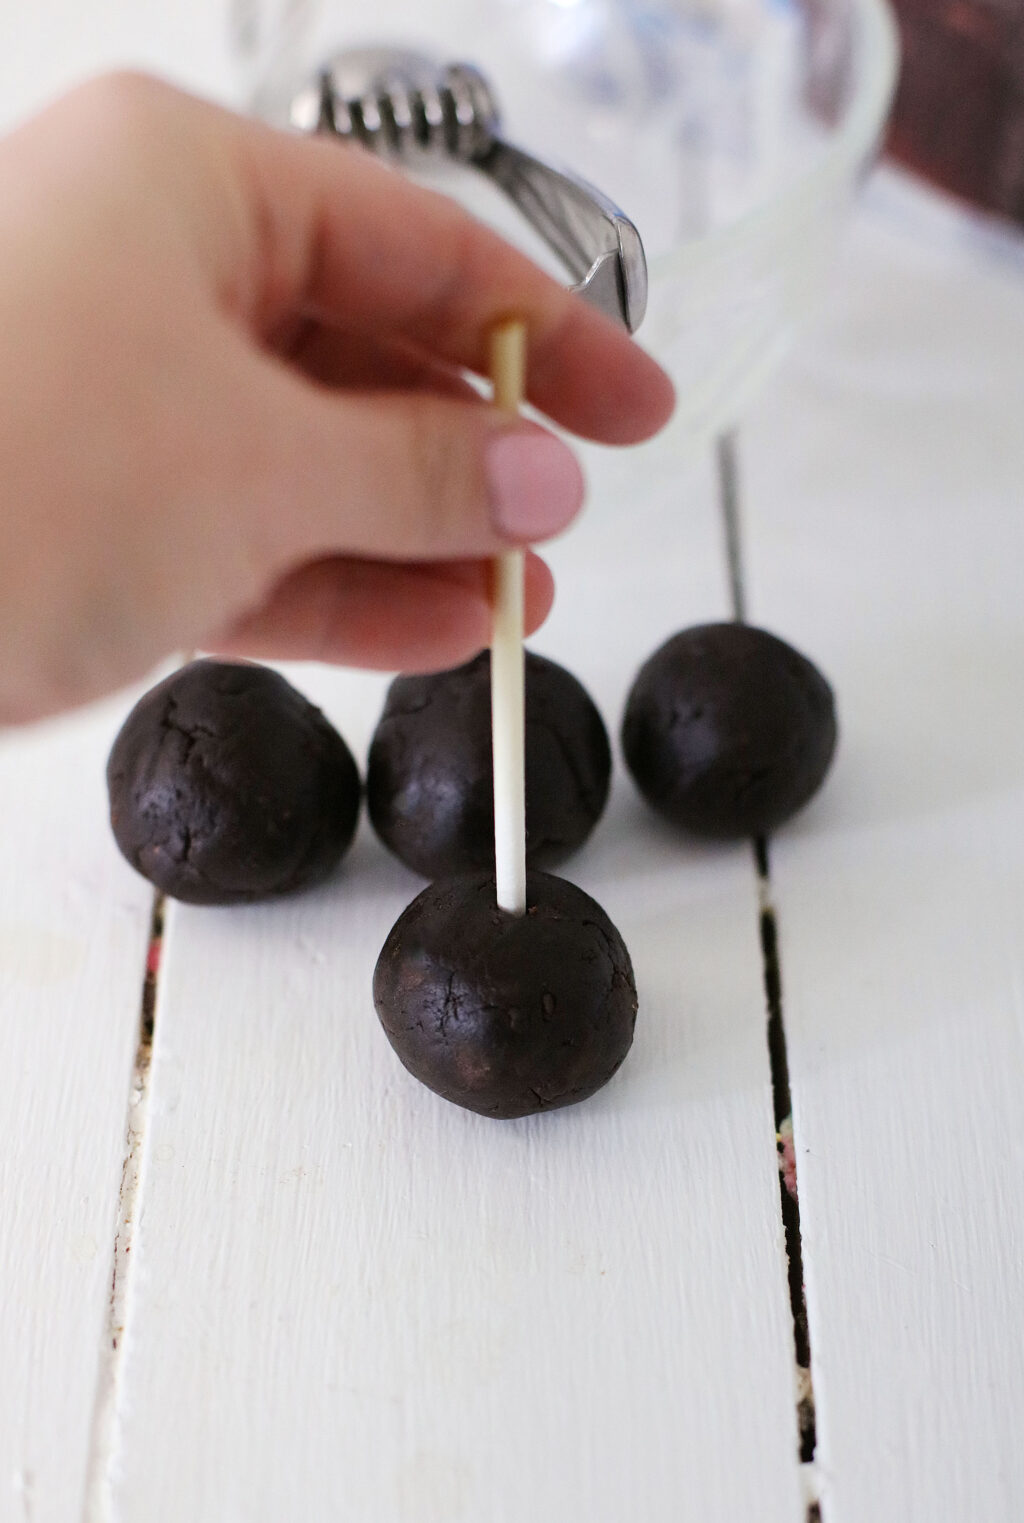 candy stick being inserted into chocolate cake ball